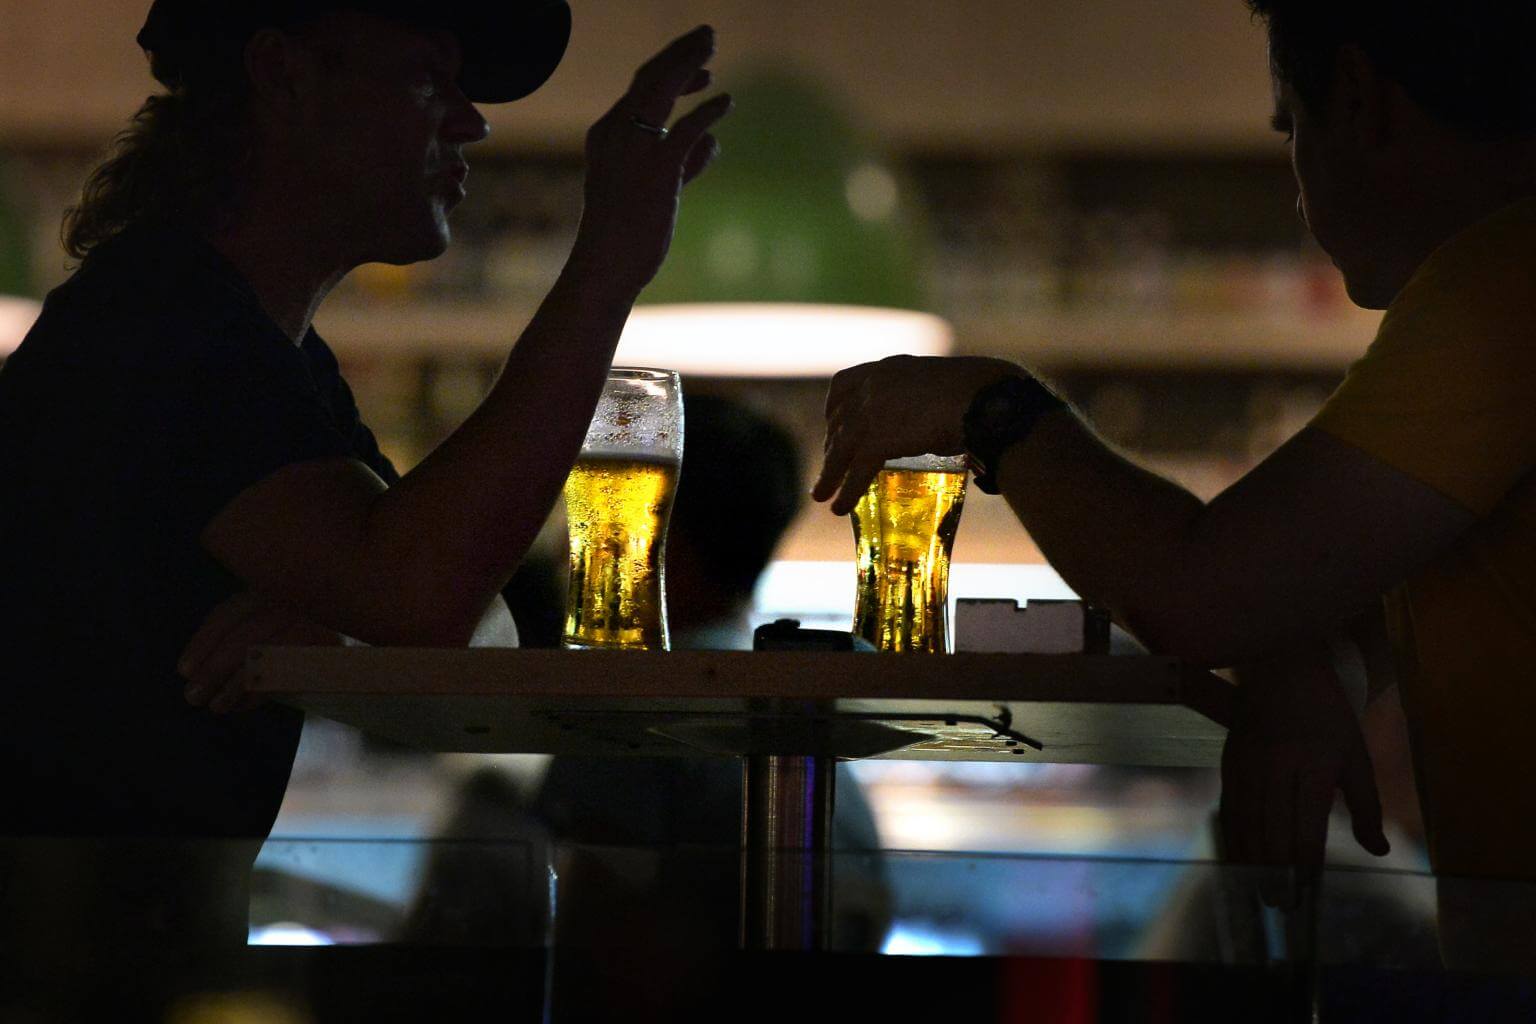 Why Are There So Many More Expats Than Singaporeans In Alcoholics Anonymous?